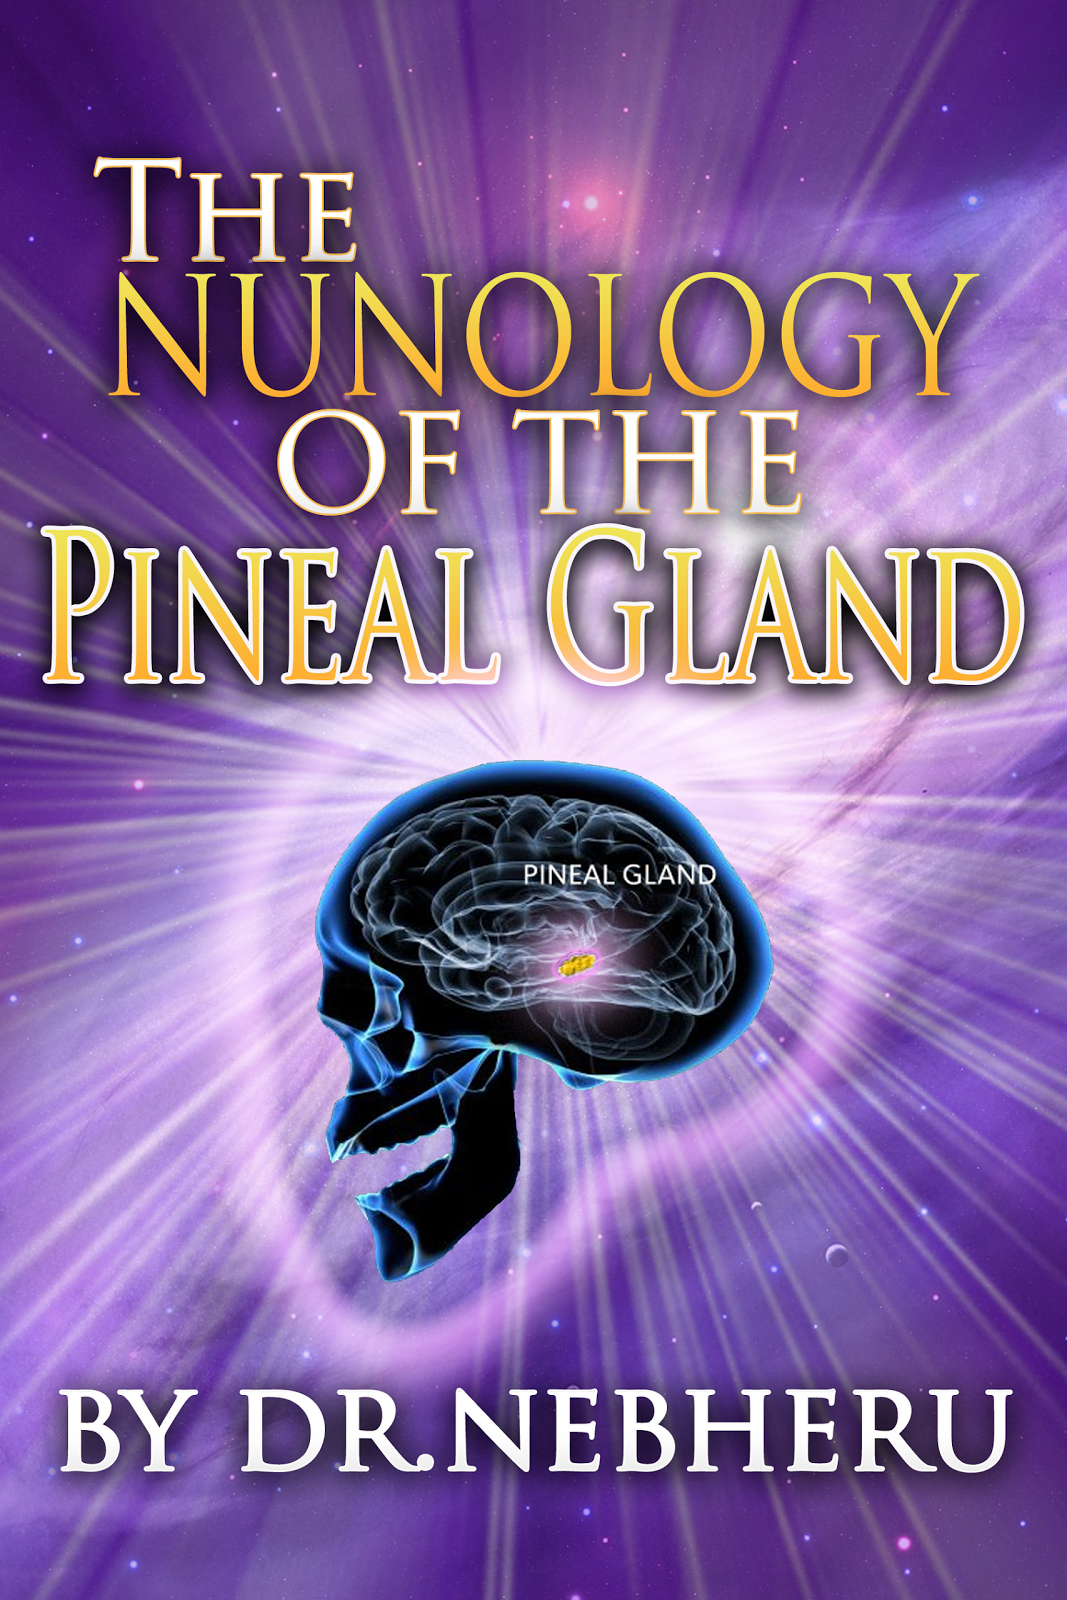 Nunology+of+the+Pineal+Gland+ebook+copy.png